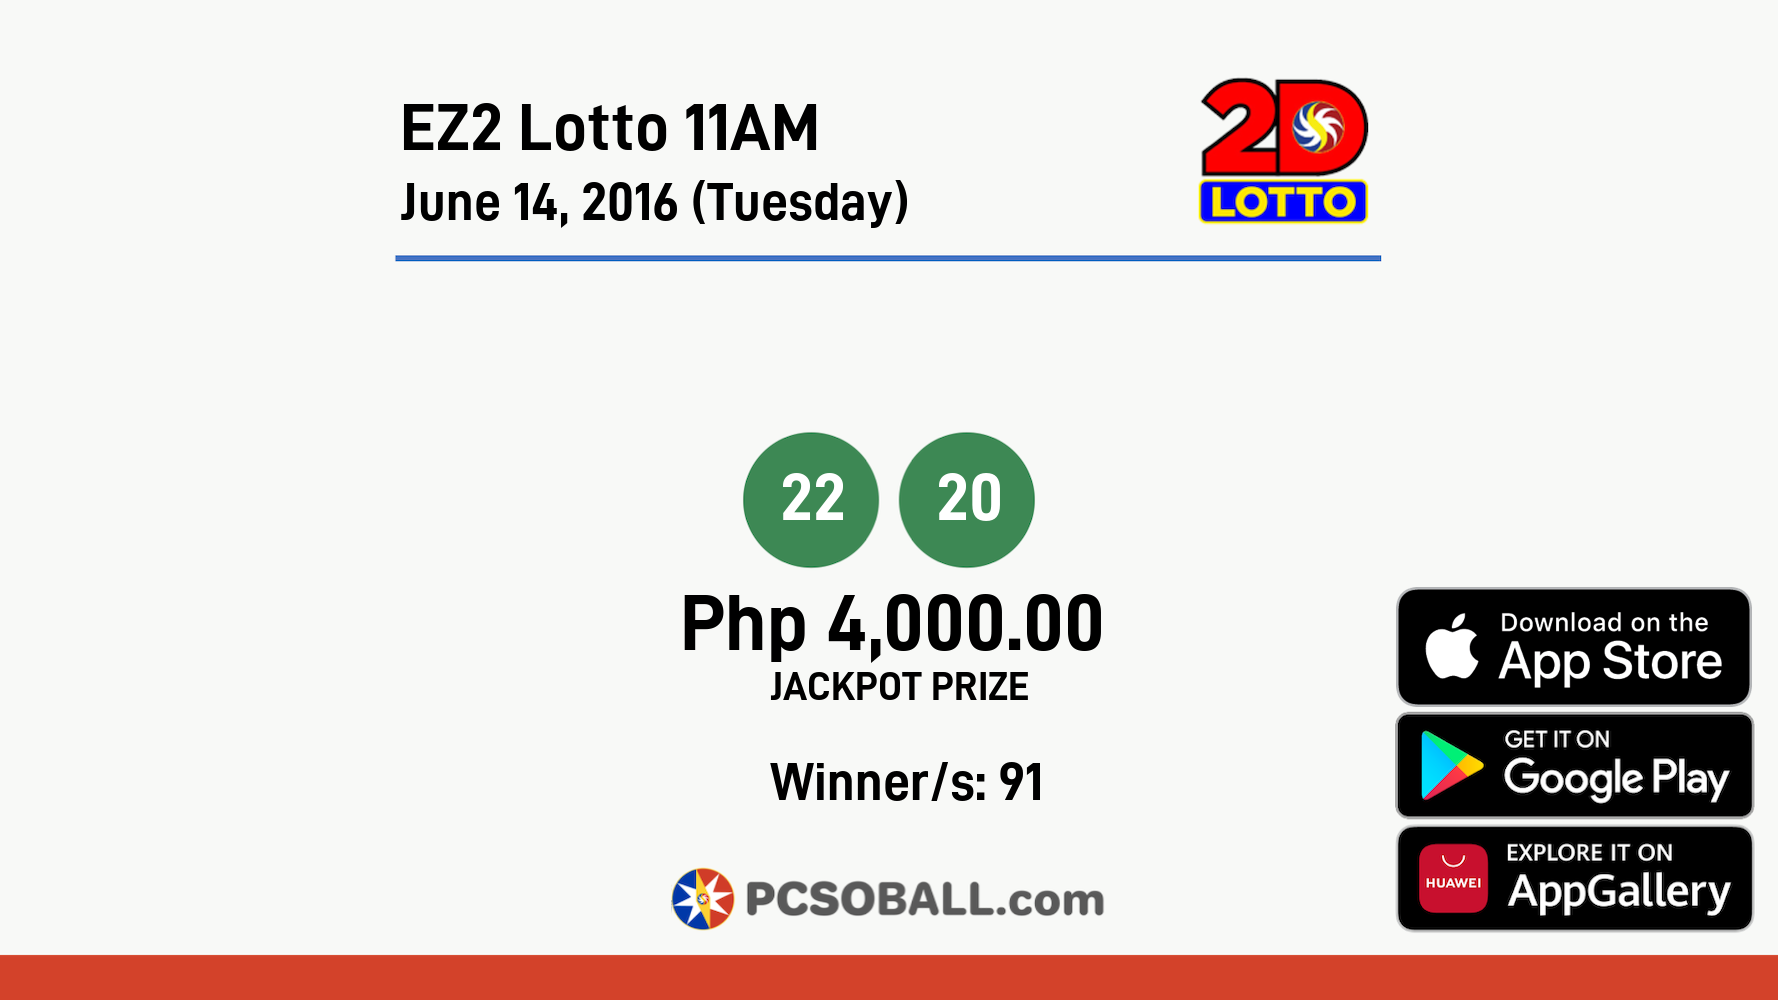 EZ2 Lotto 11AM June 14, 2016 (Tuesday) Result